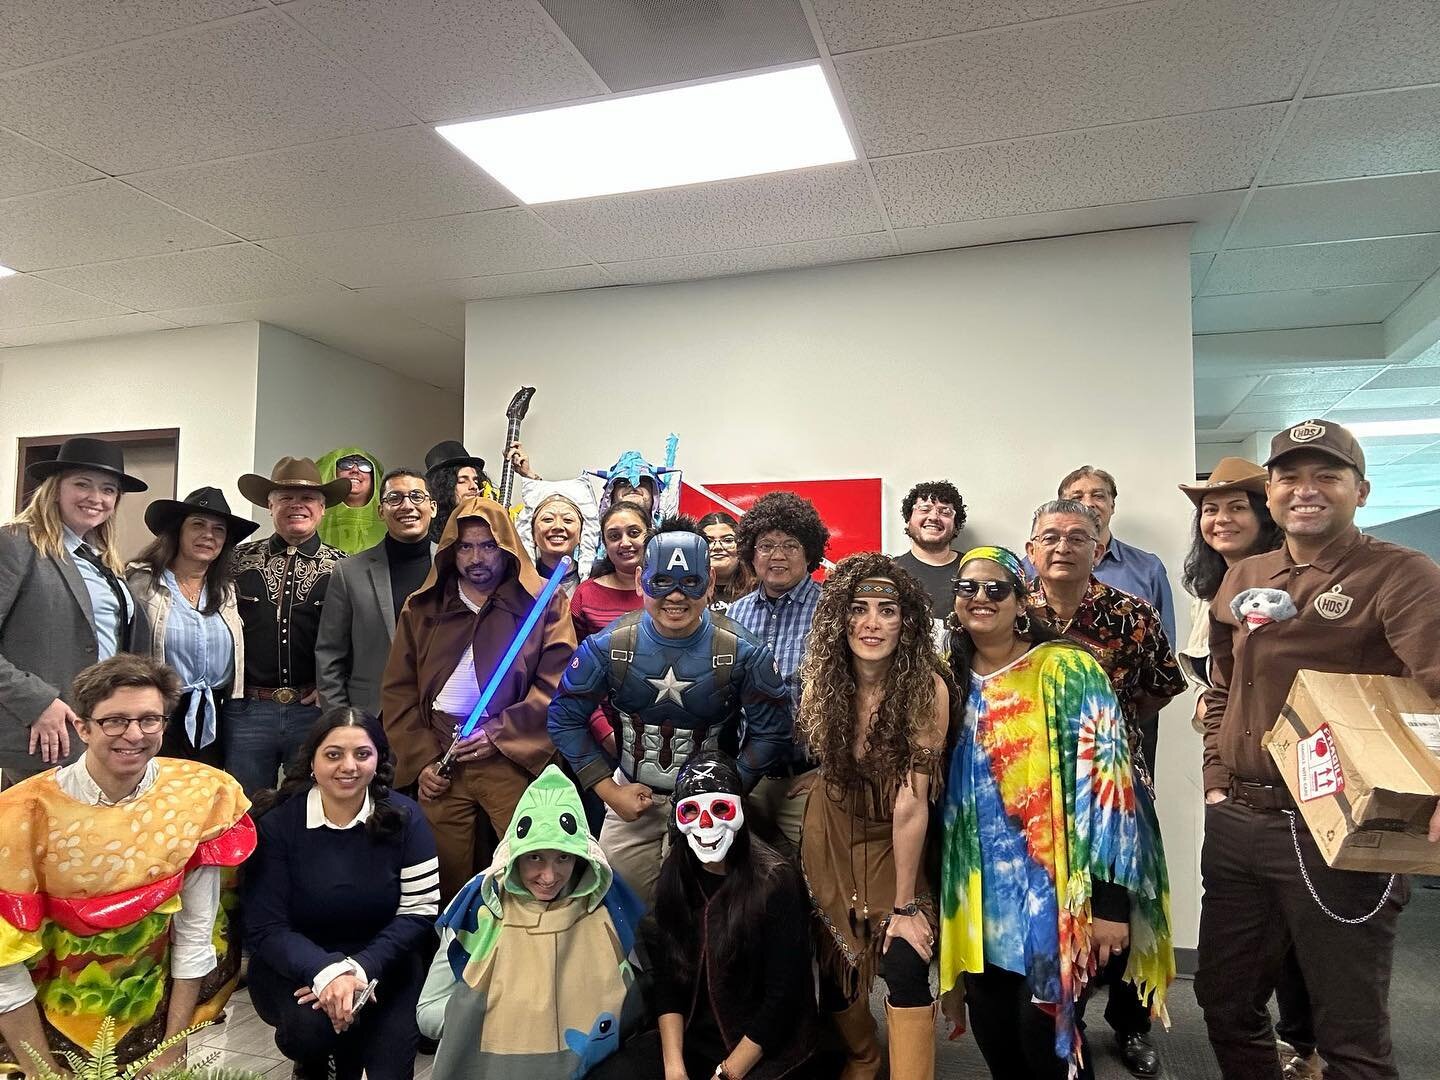 Our annual Halloween Costume contest! The Tucker Sadler team always has a blast together! 🎃👻